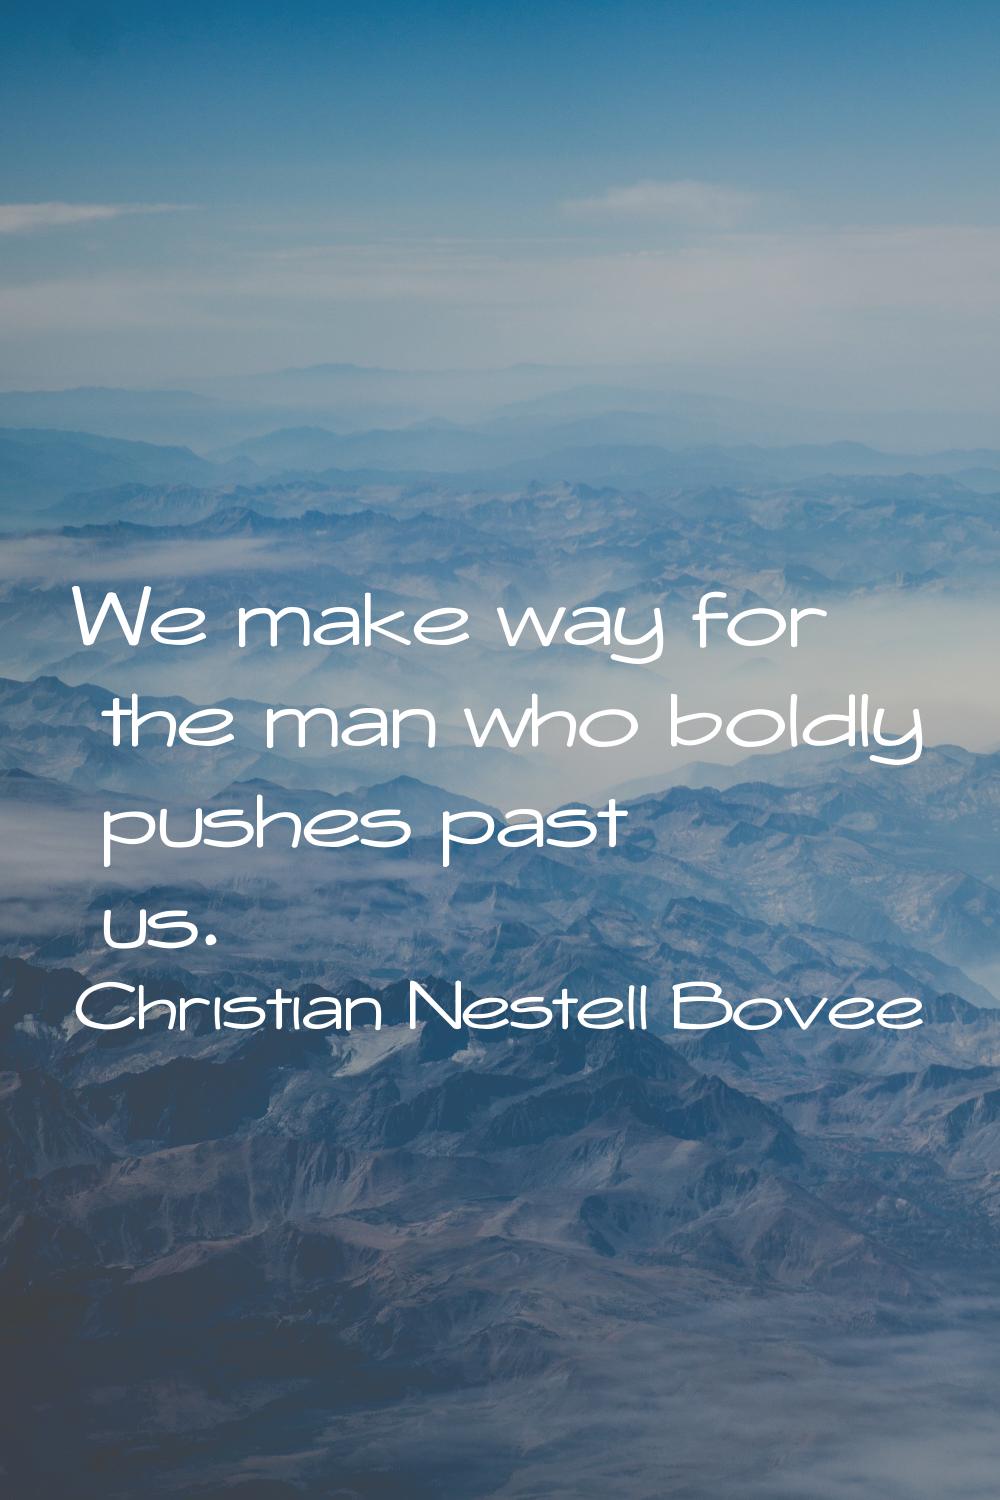 We make way for the man who boldly pushes past us.